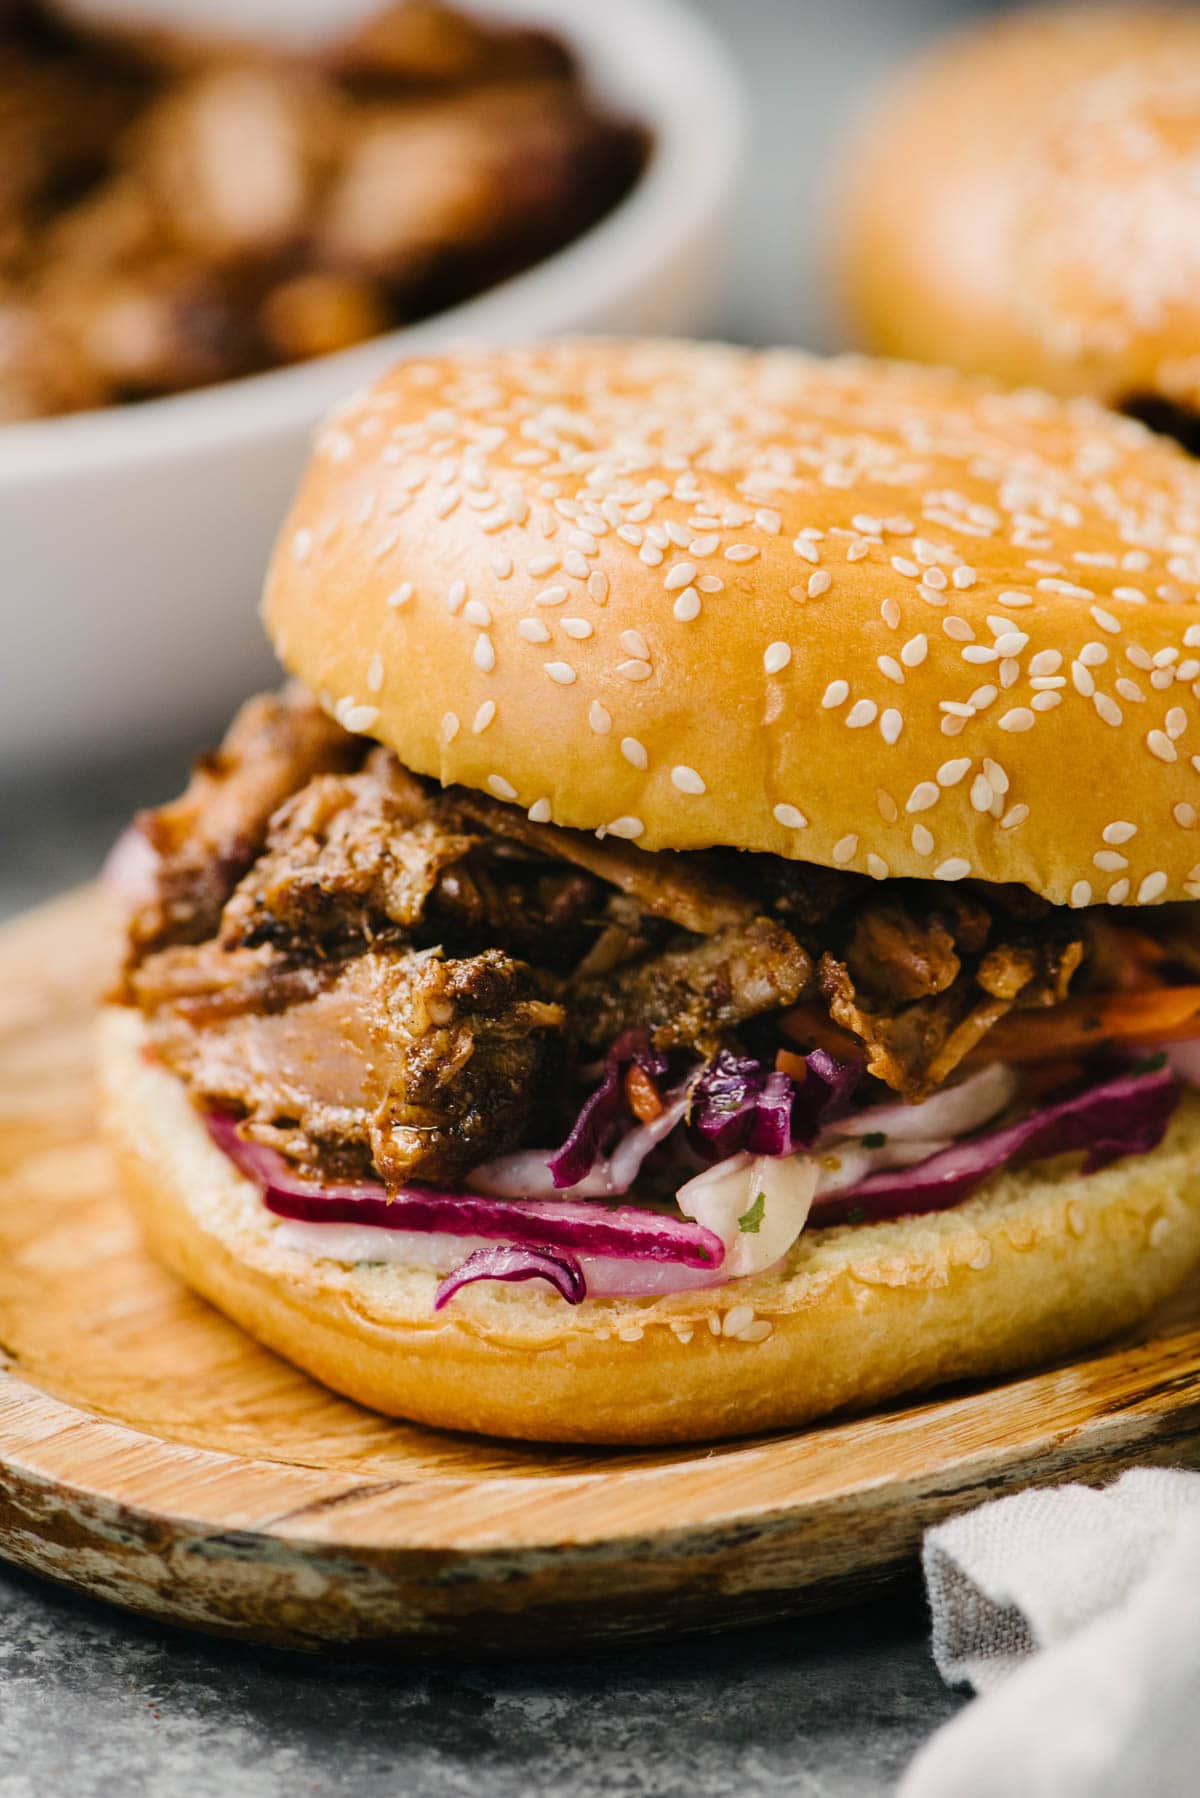 Side view, a pulled pork sandwich with coleslaw on a brioche bun on a wood serving board; a bowl of pulled pork and a second sandwich are in the background.